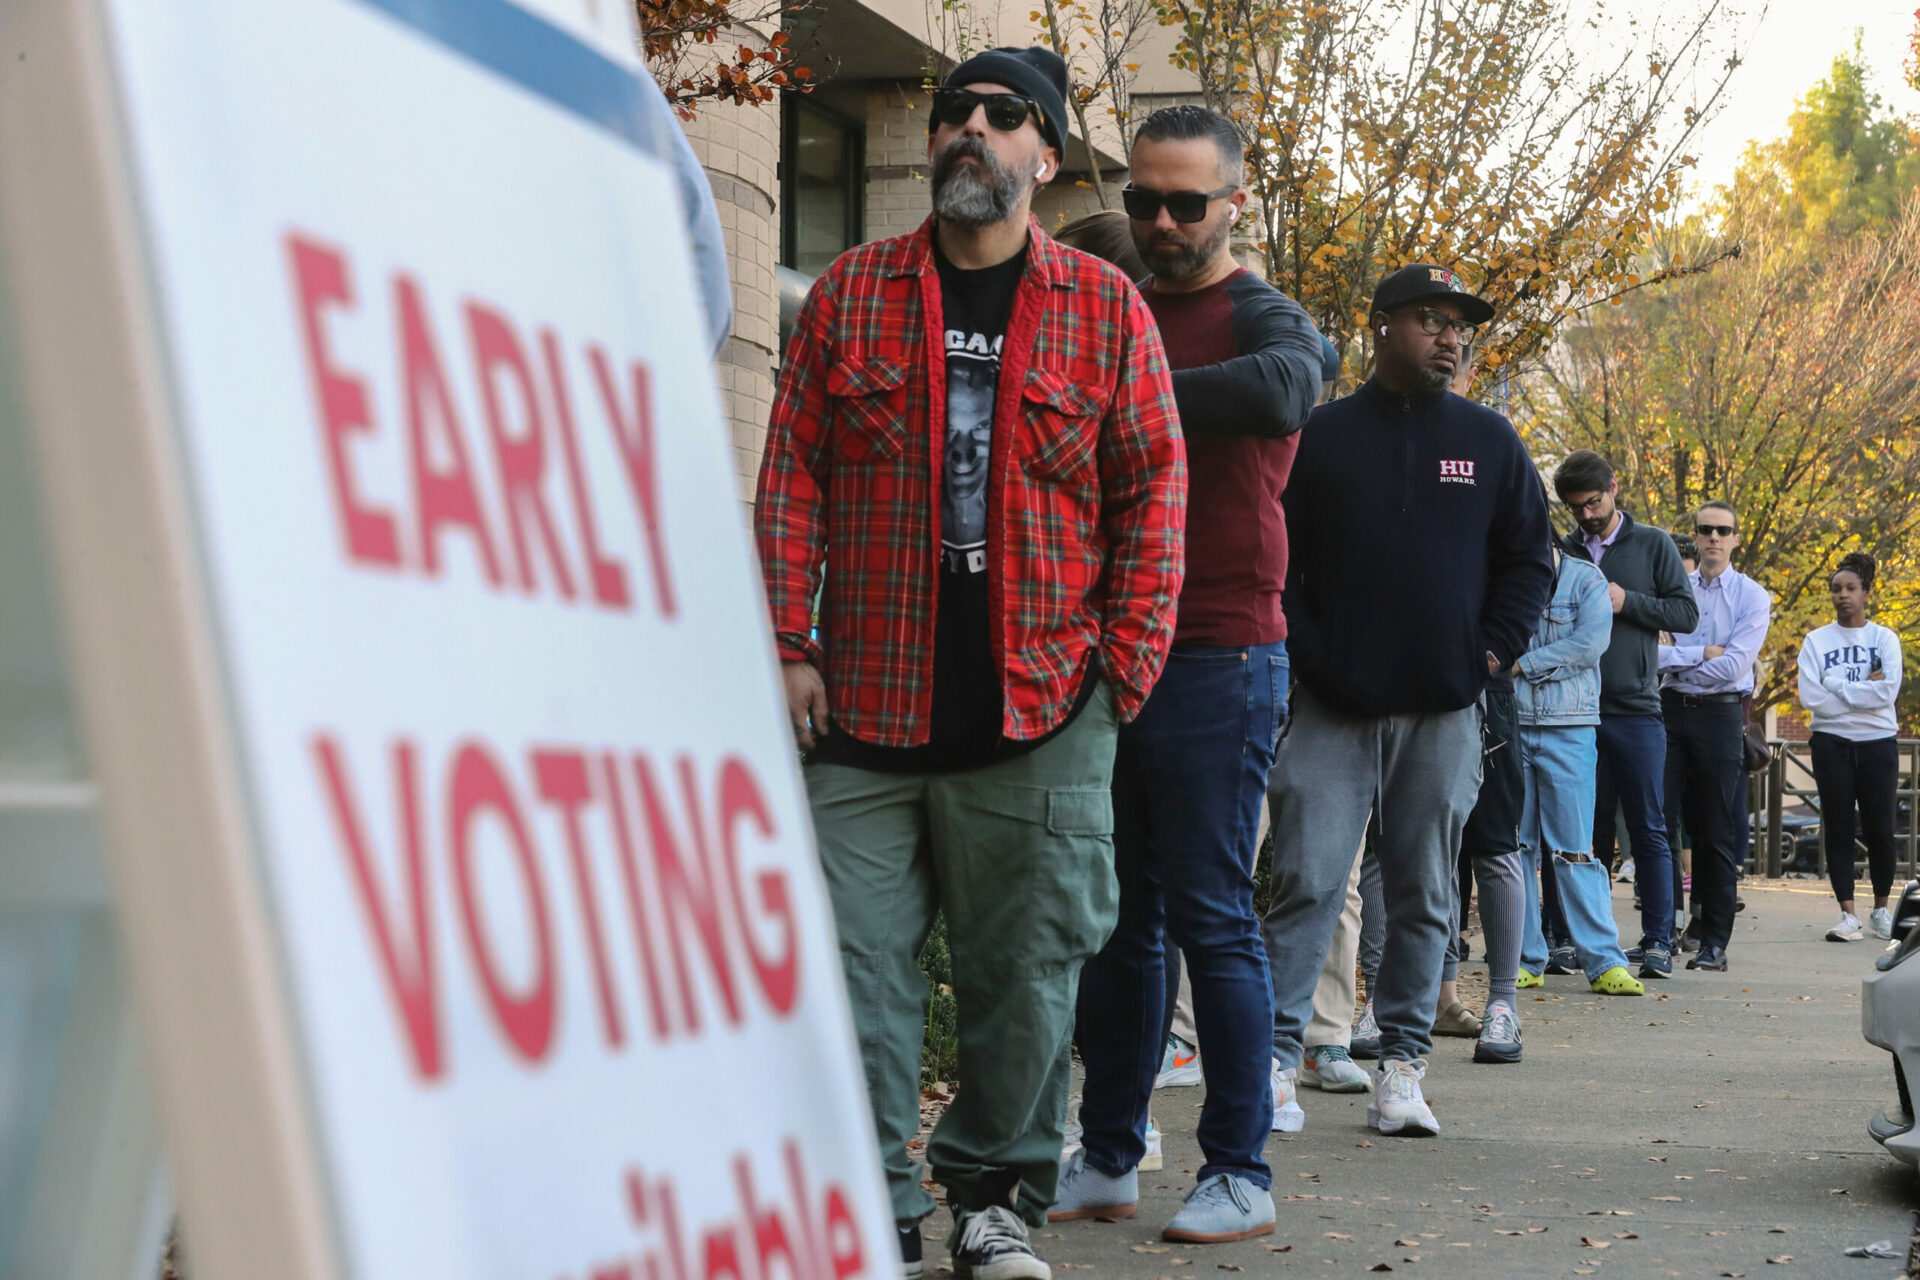 Georgia voter intimidation trial begins after 250,000 registrations challenged